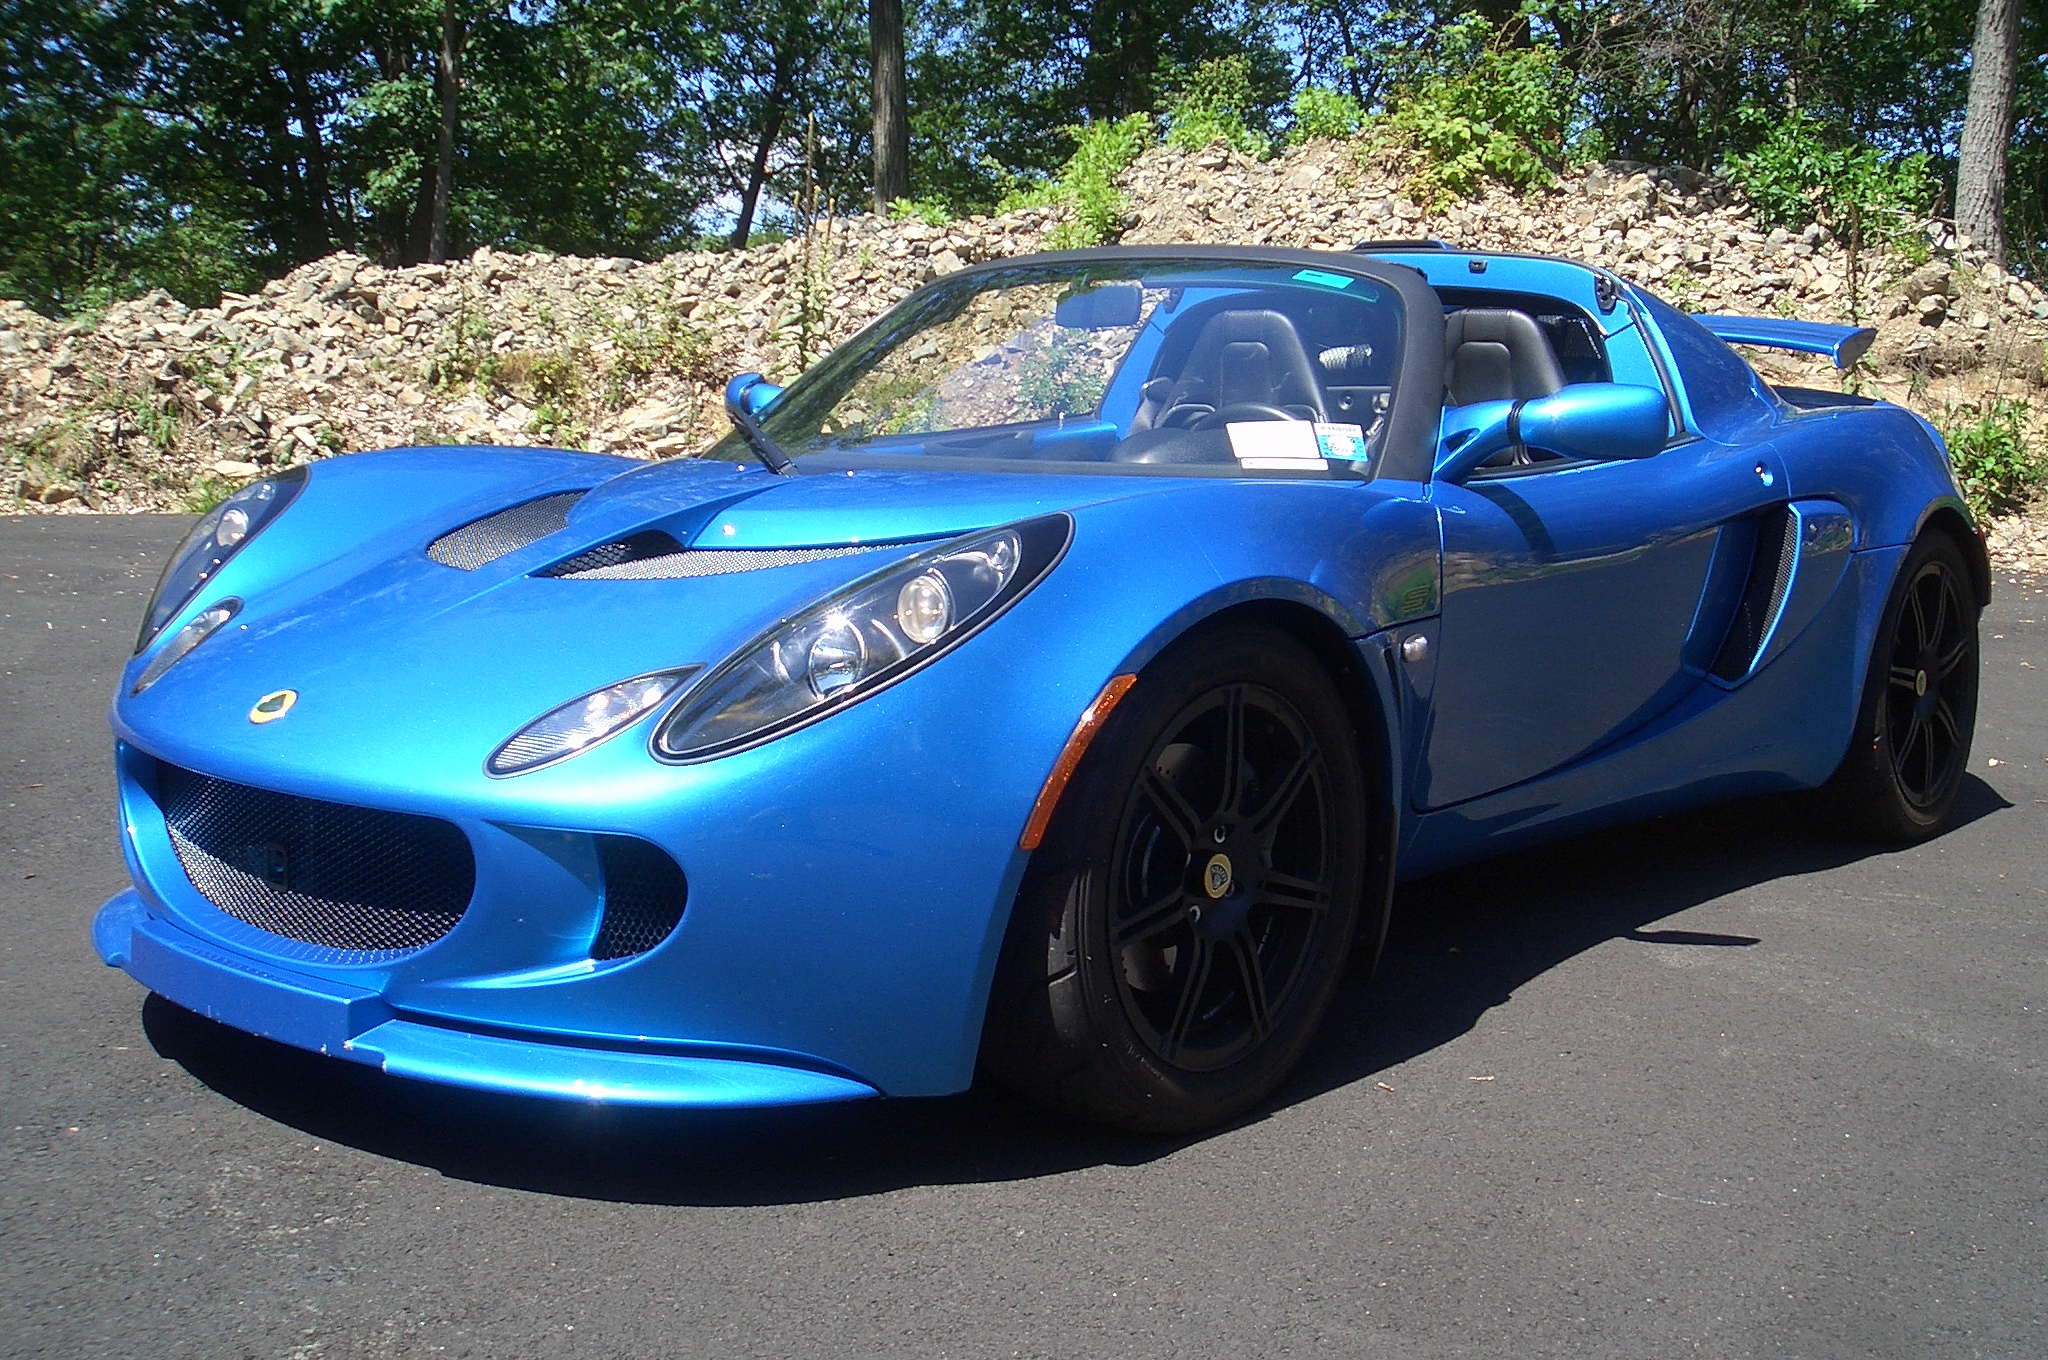 Lotus Exige S For Sale, Lotus sports car | Cars For Sale